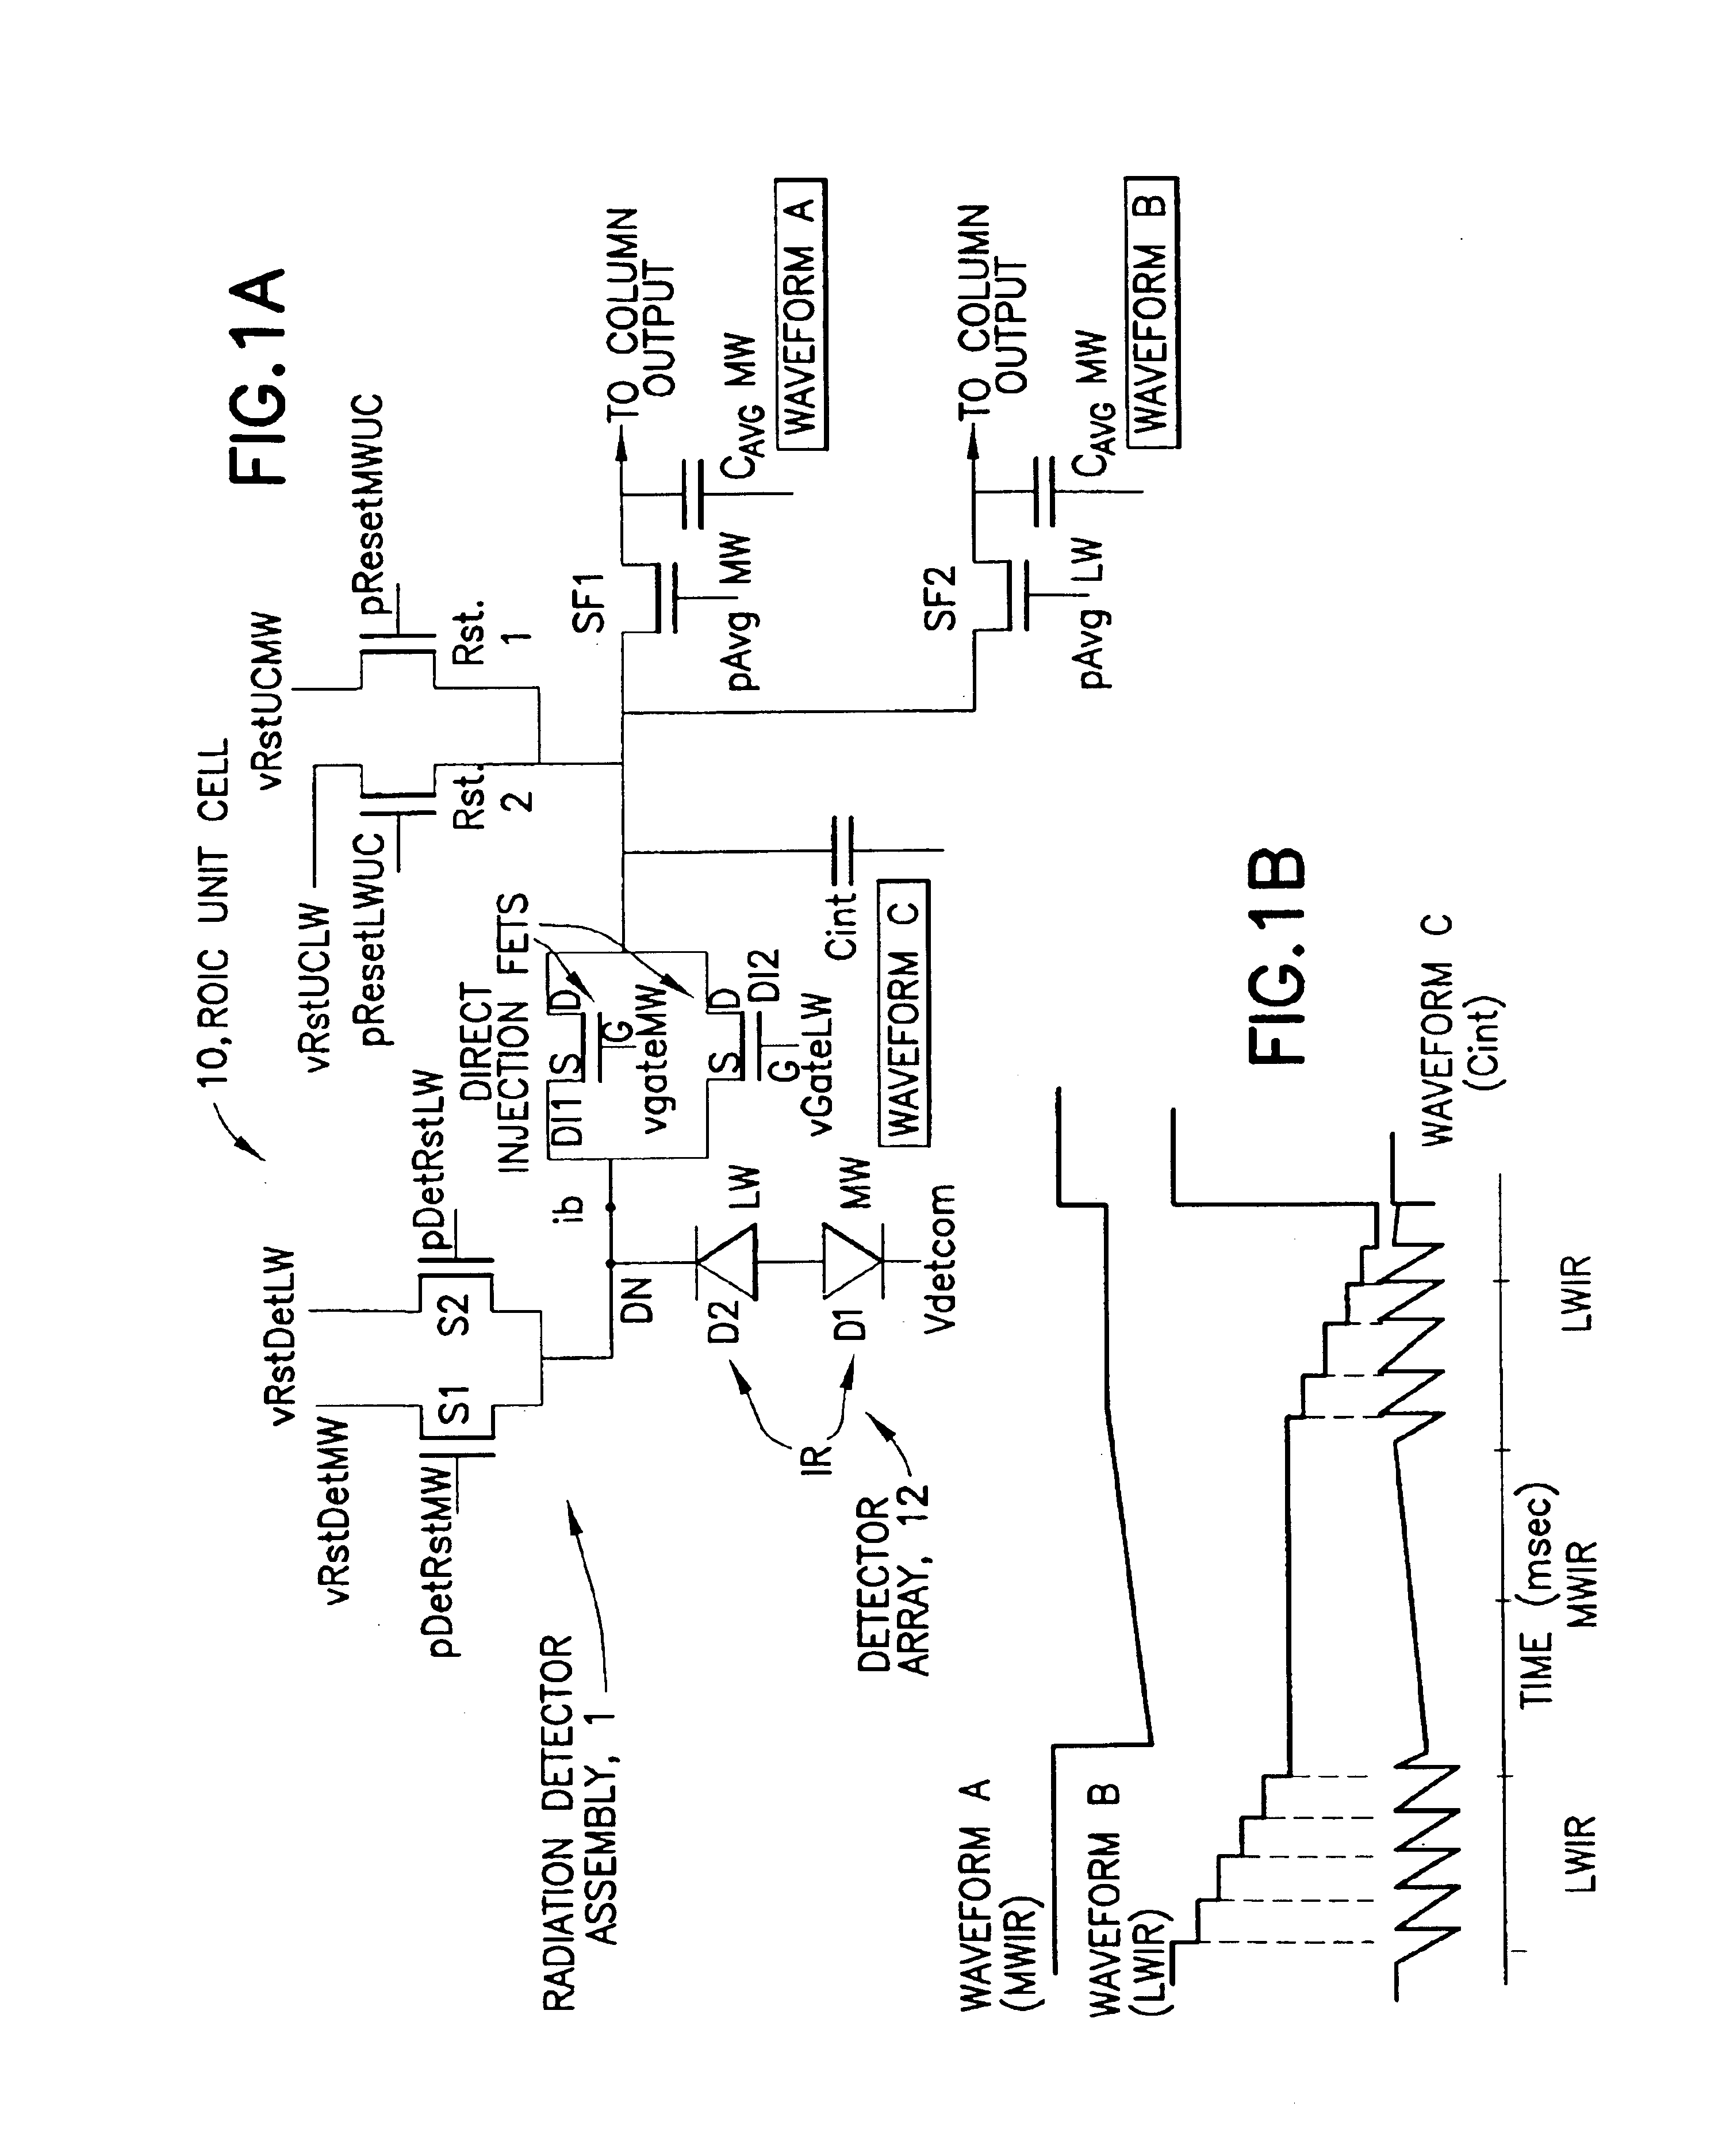 IRFPA ROIC with dual TDM reset integrators and sub-frame averaging functions per unit cell